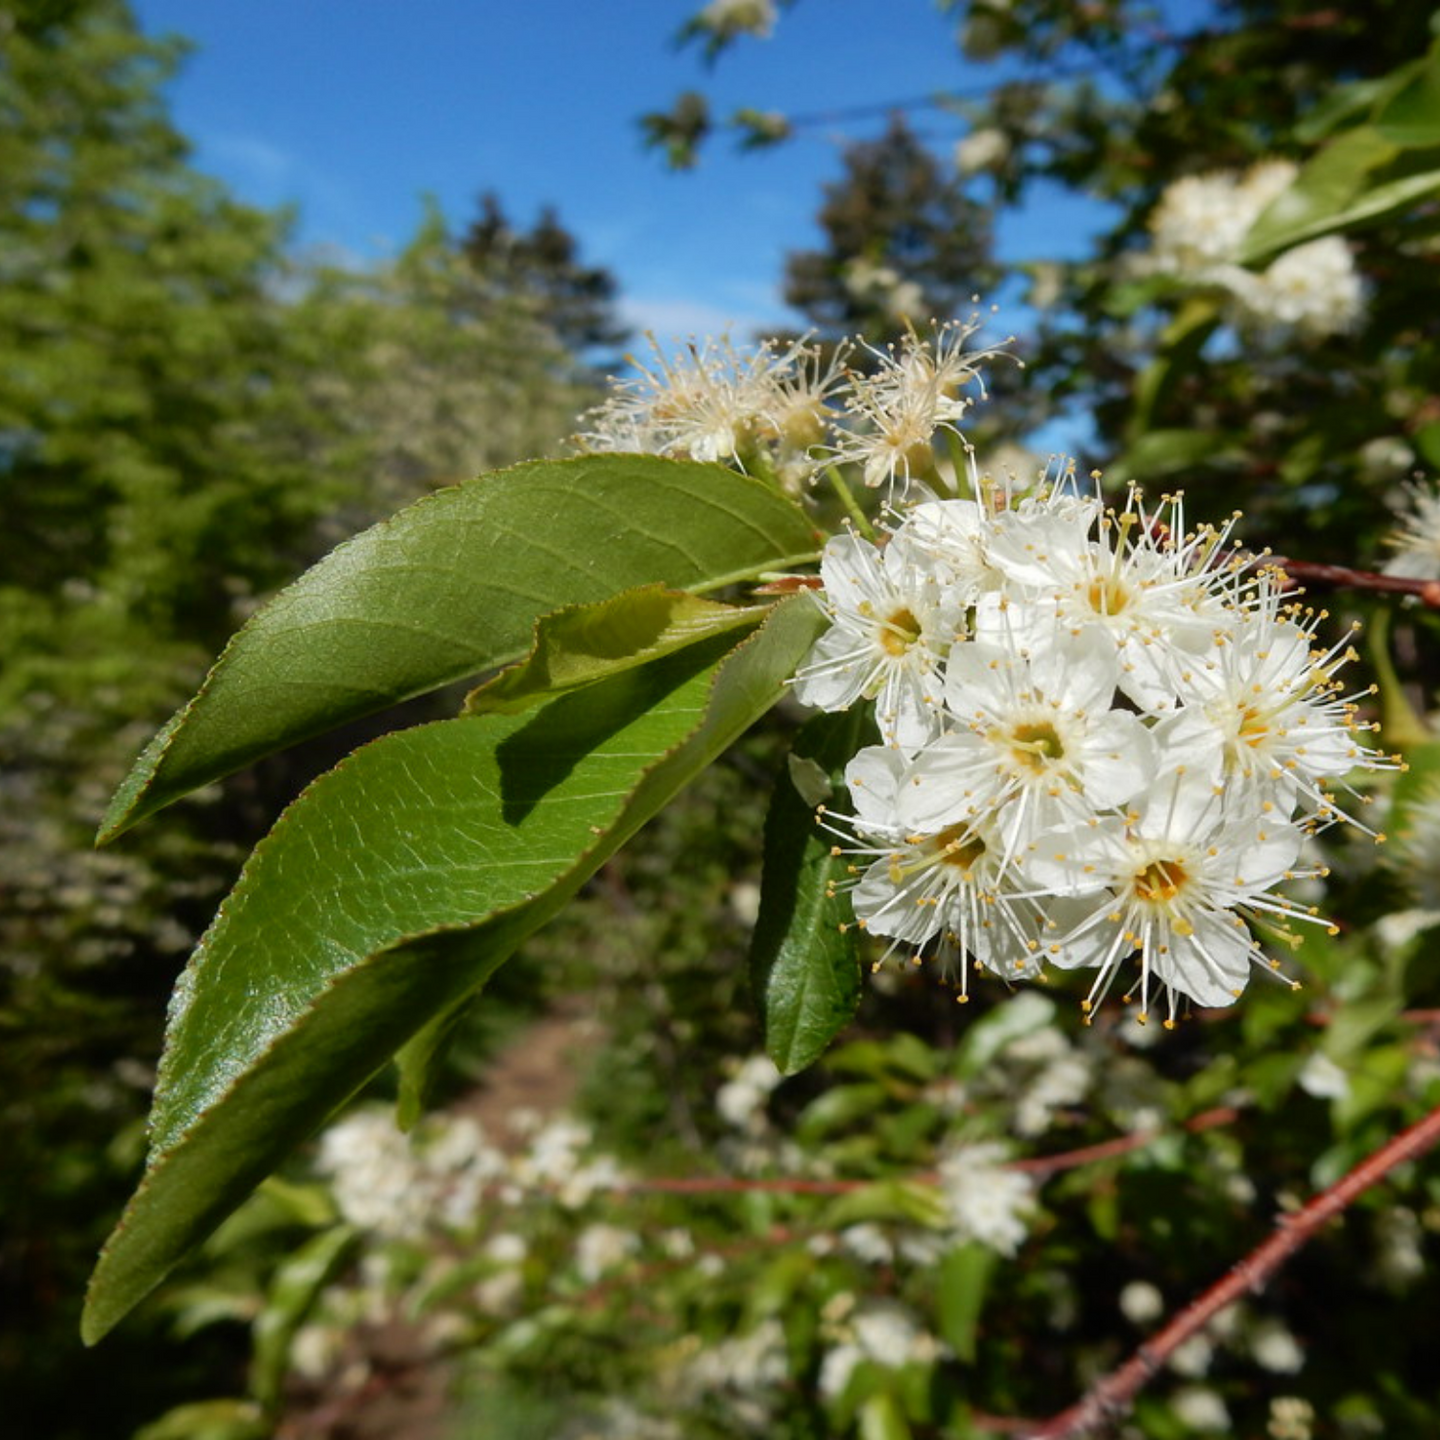 Close-up of the white flower and leaf of Prunus emarginata, Bitter Cherry tree. Another stunning Northwest Native Plant available at Sparrowhawk Native Plants Nursery in Portland, Oregon